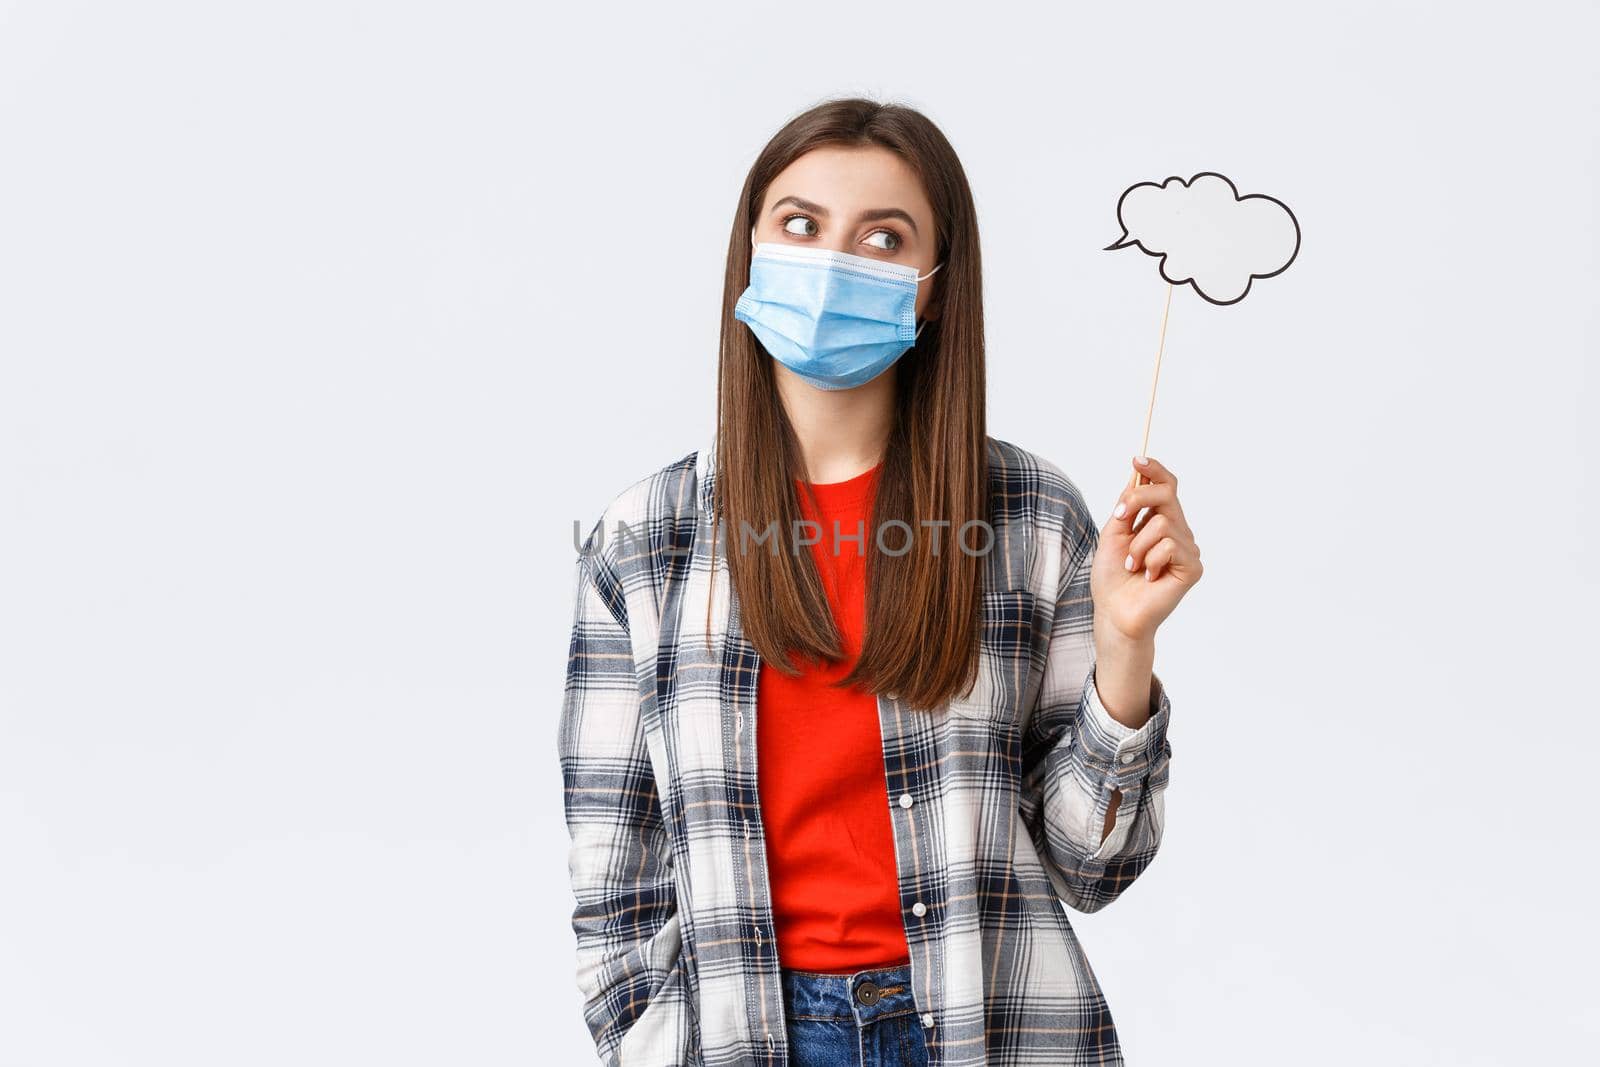 Coronavirus outbreak, leisure on quarantine, social distancing and emotions concept. Thoughtful smart young girl in medical mask searching for inspiration, thinking, holding commend cloud.